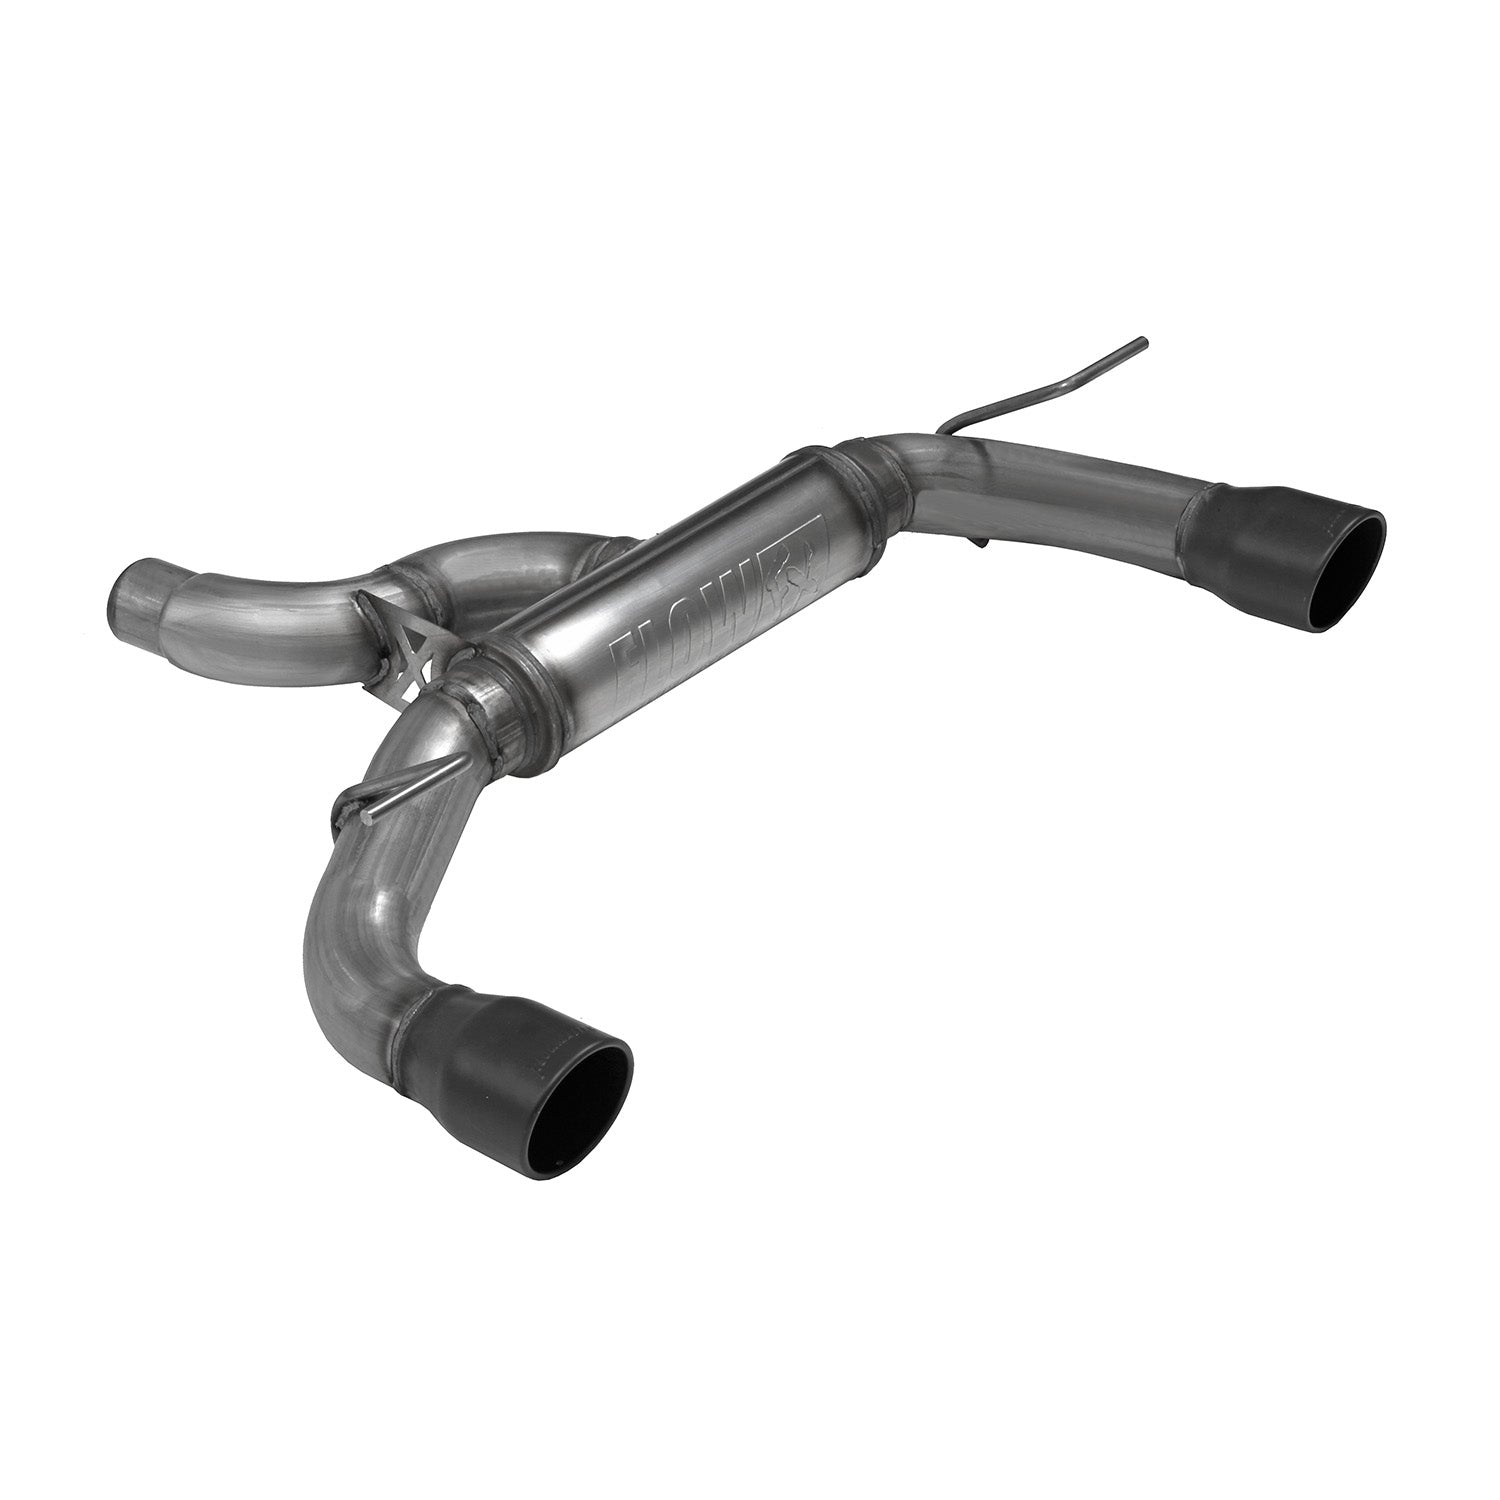 '21-23 Ford Bronco FlowFx Axle-Back Dual Exit Exhaust System Flowmaster display